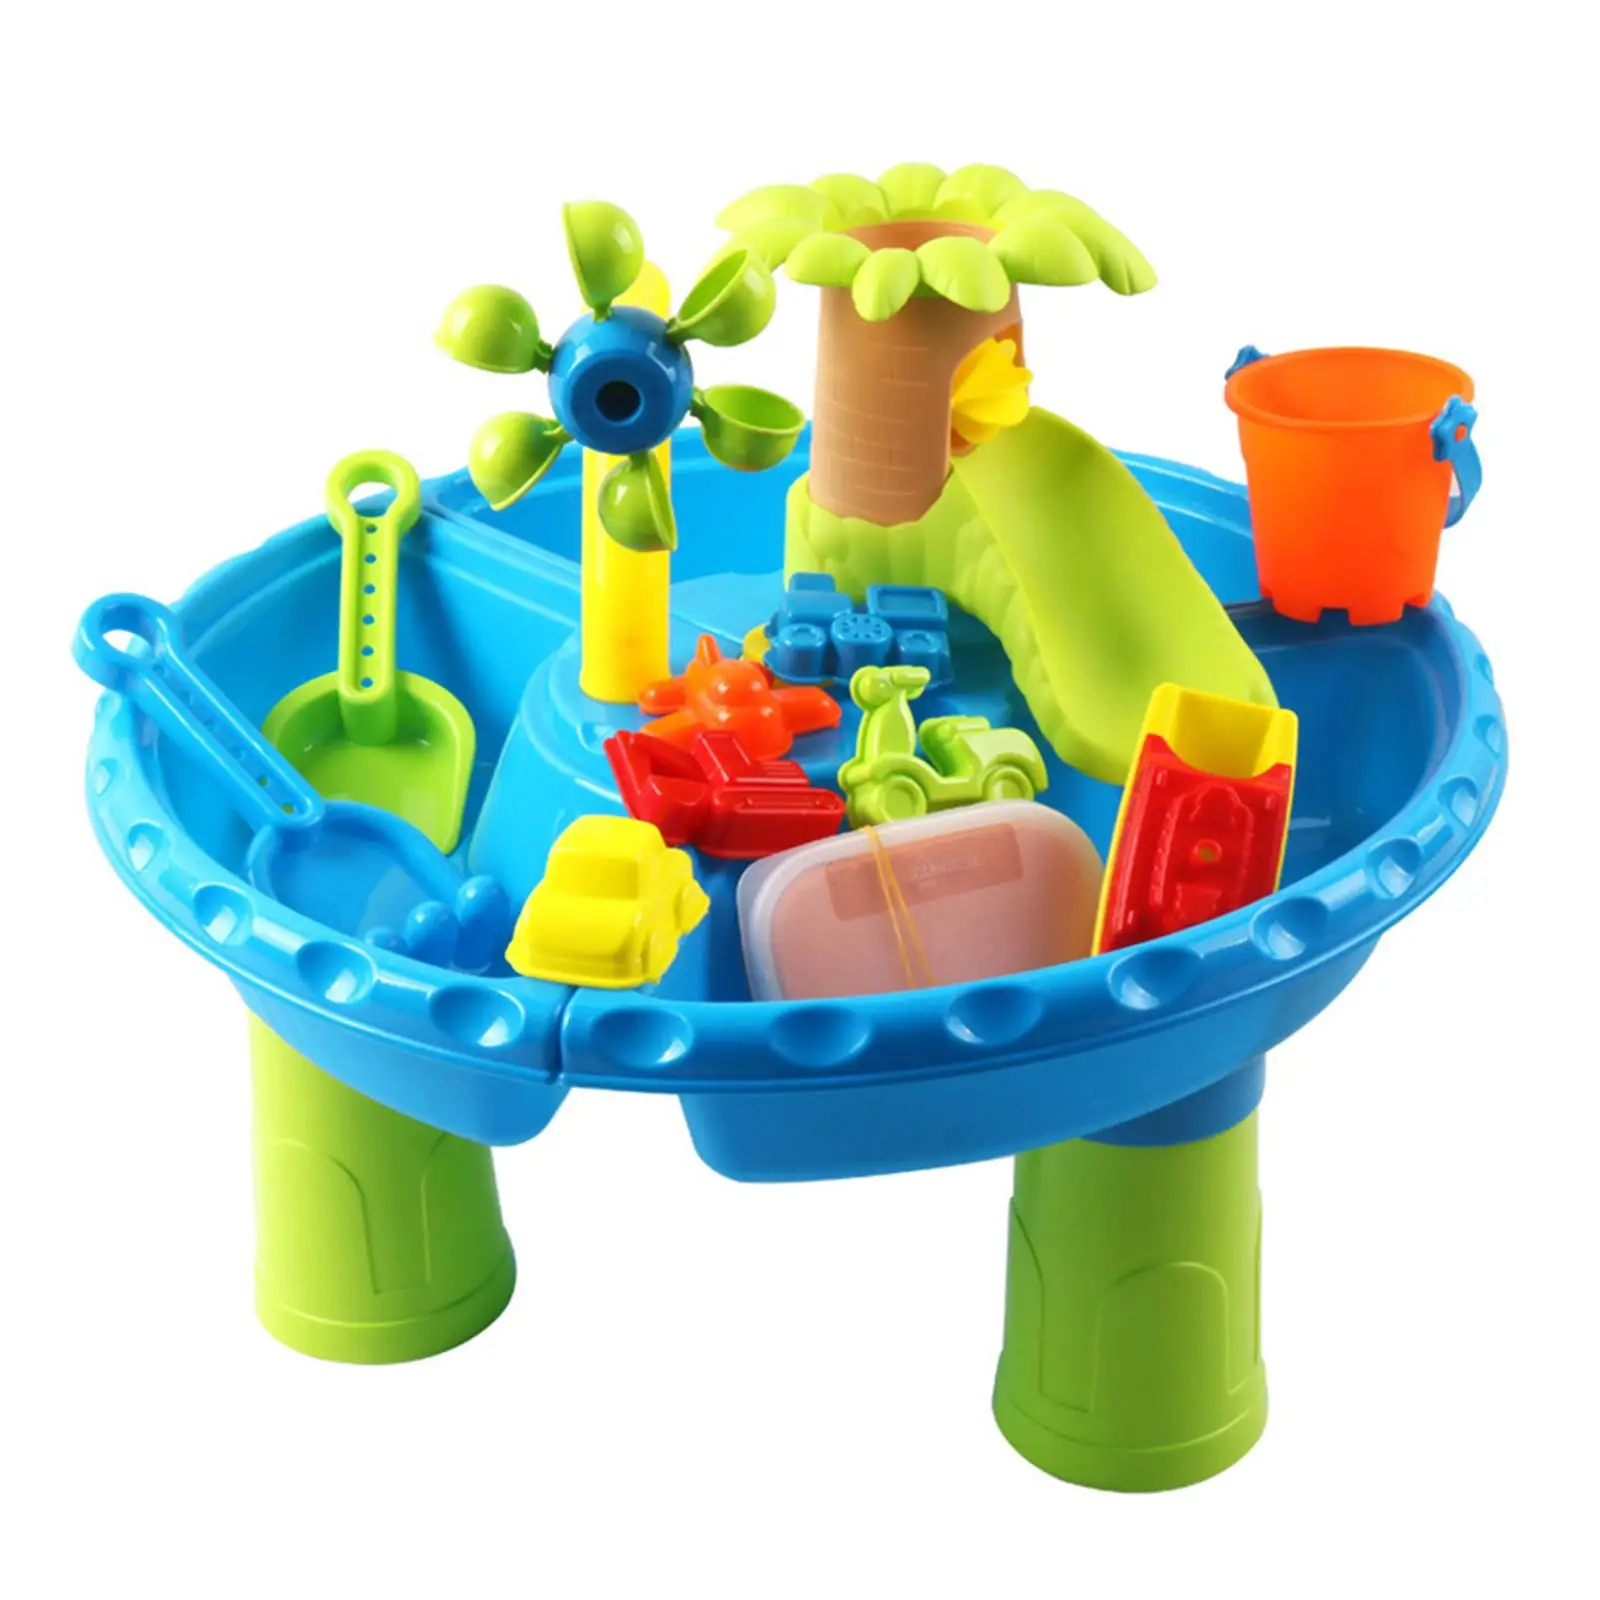   Table Outdoor Garden Set   Beach Toy for Kids, for Children Ages 3 And Up